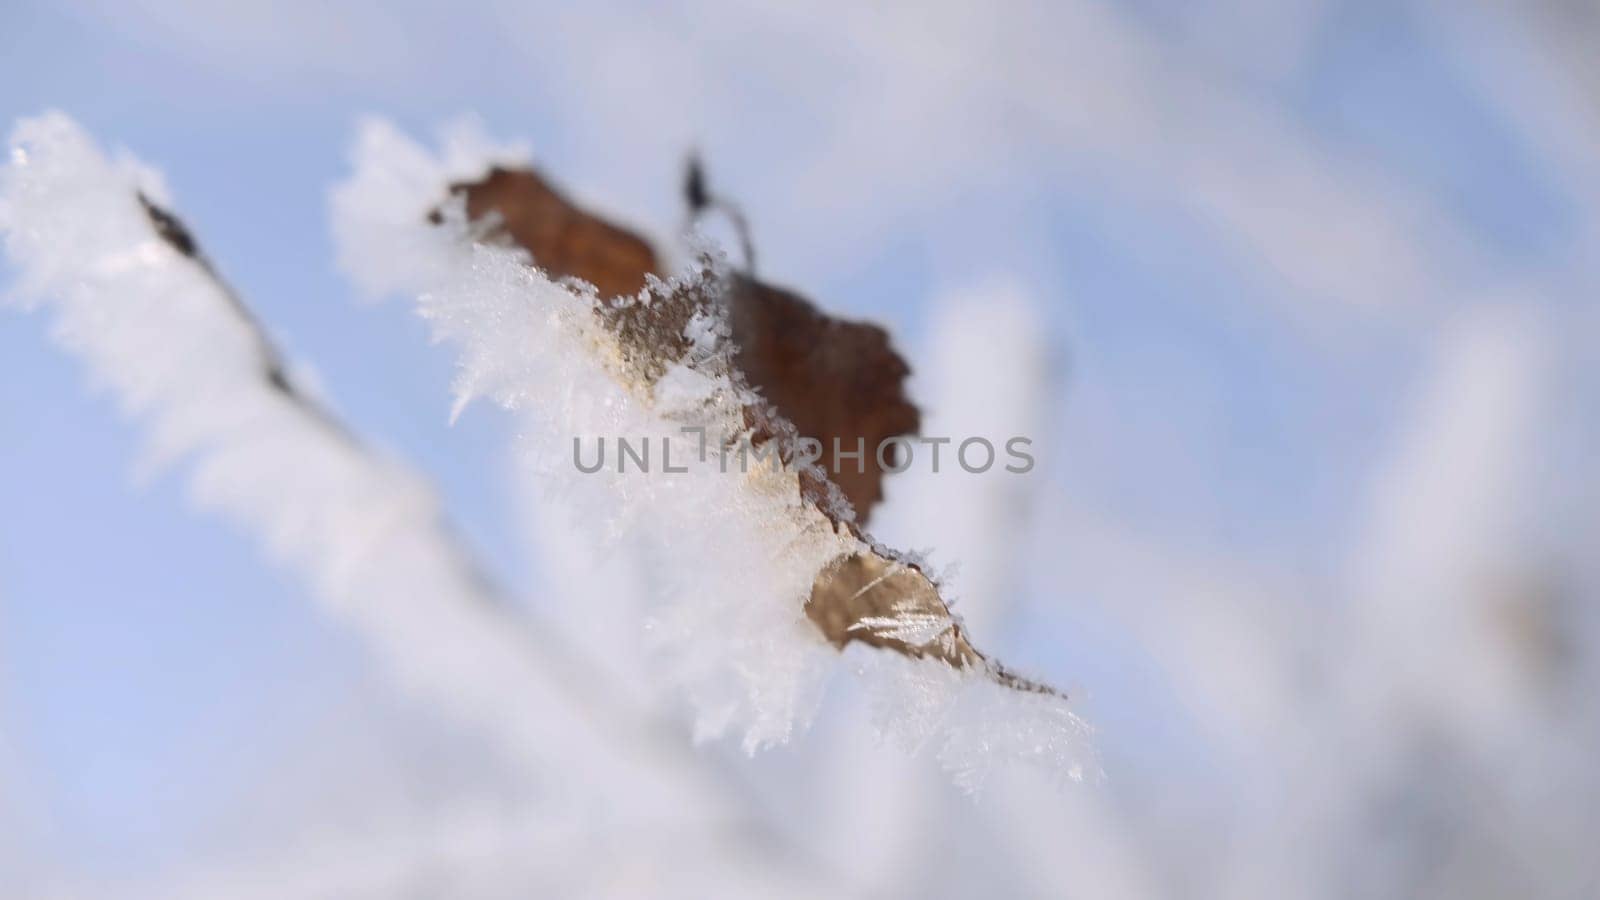 Beautiful winter nature background, snow covered branch of a tree on a frosty winter day. Creative. Close up of a dry leaf on a snowy tree branch